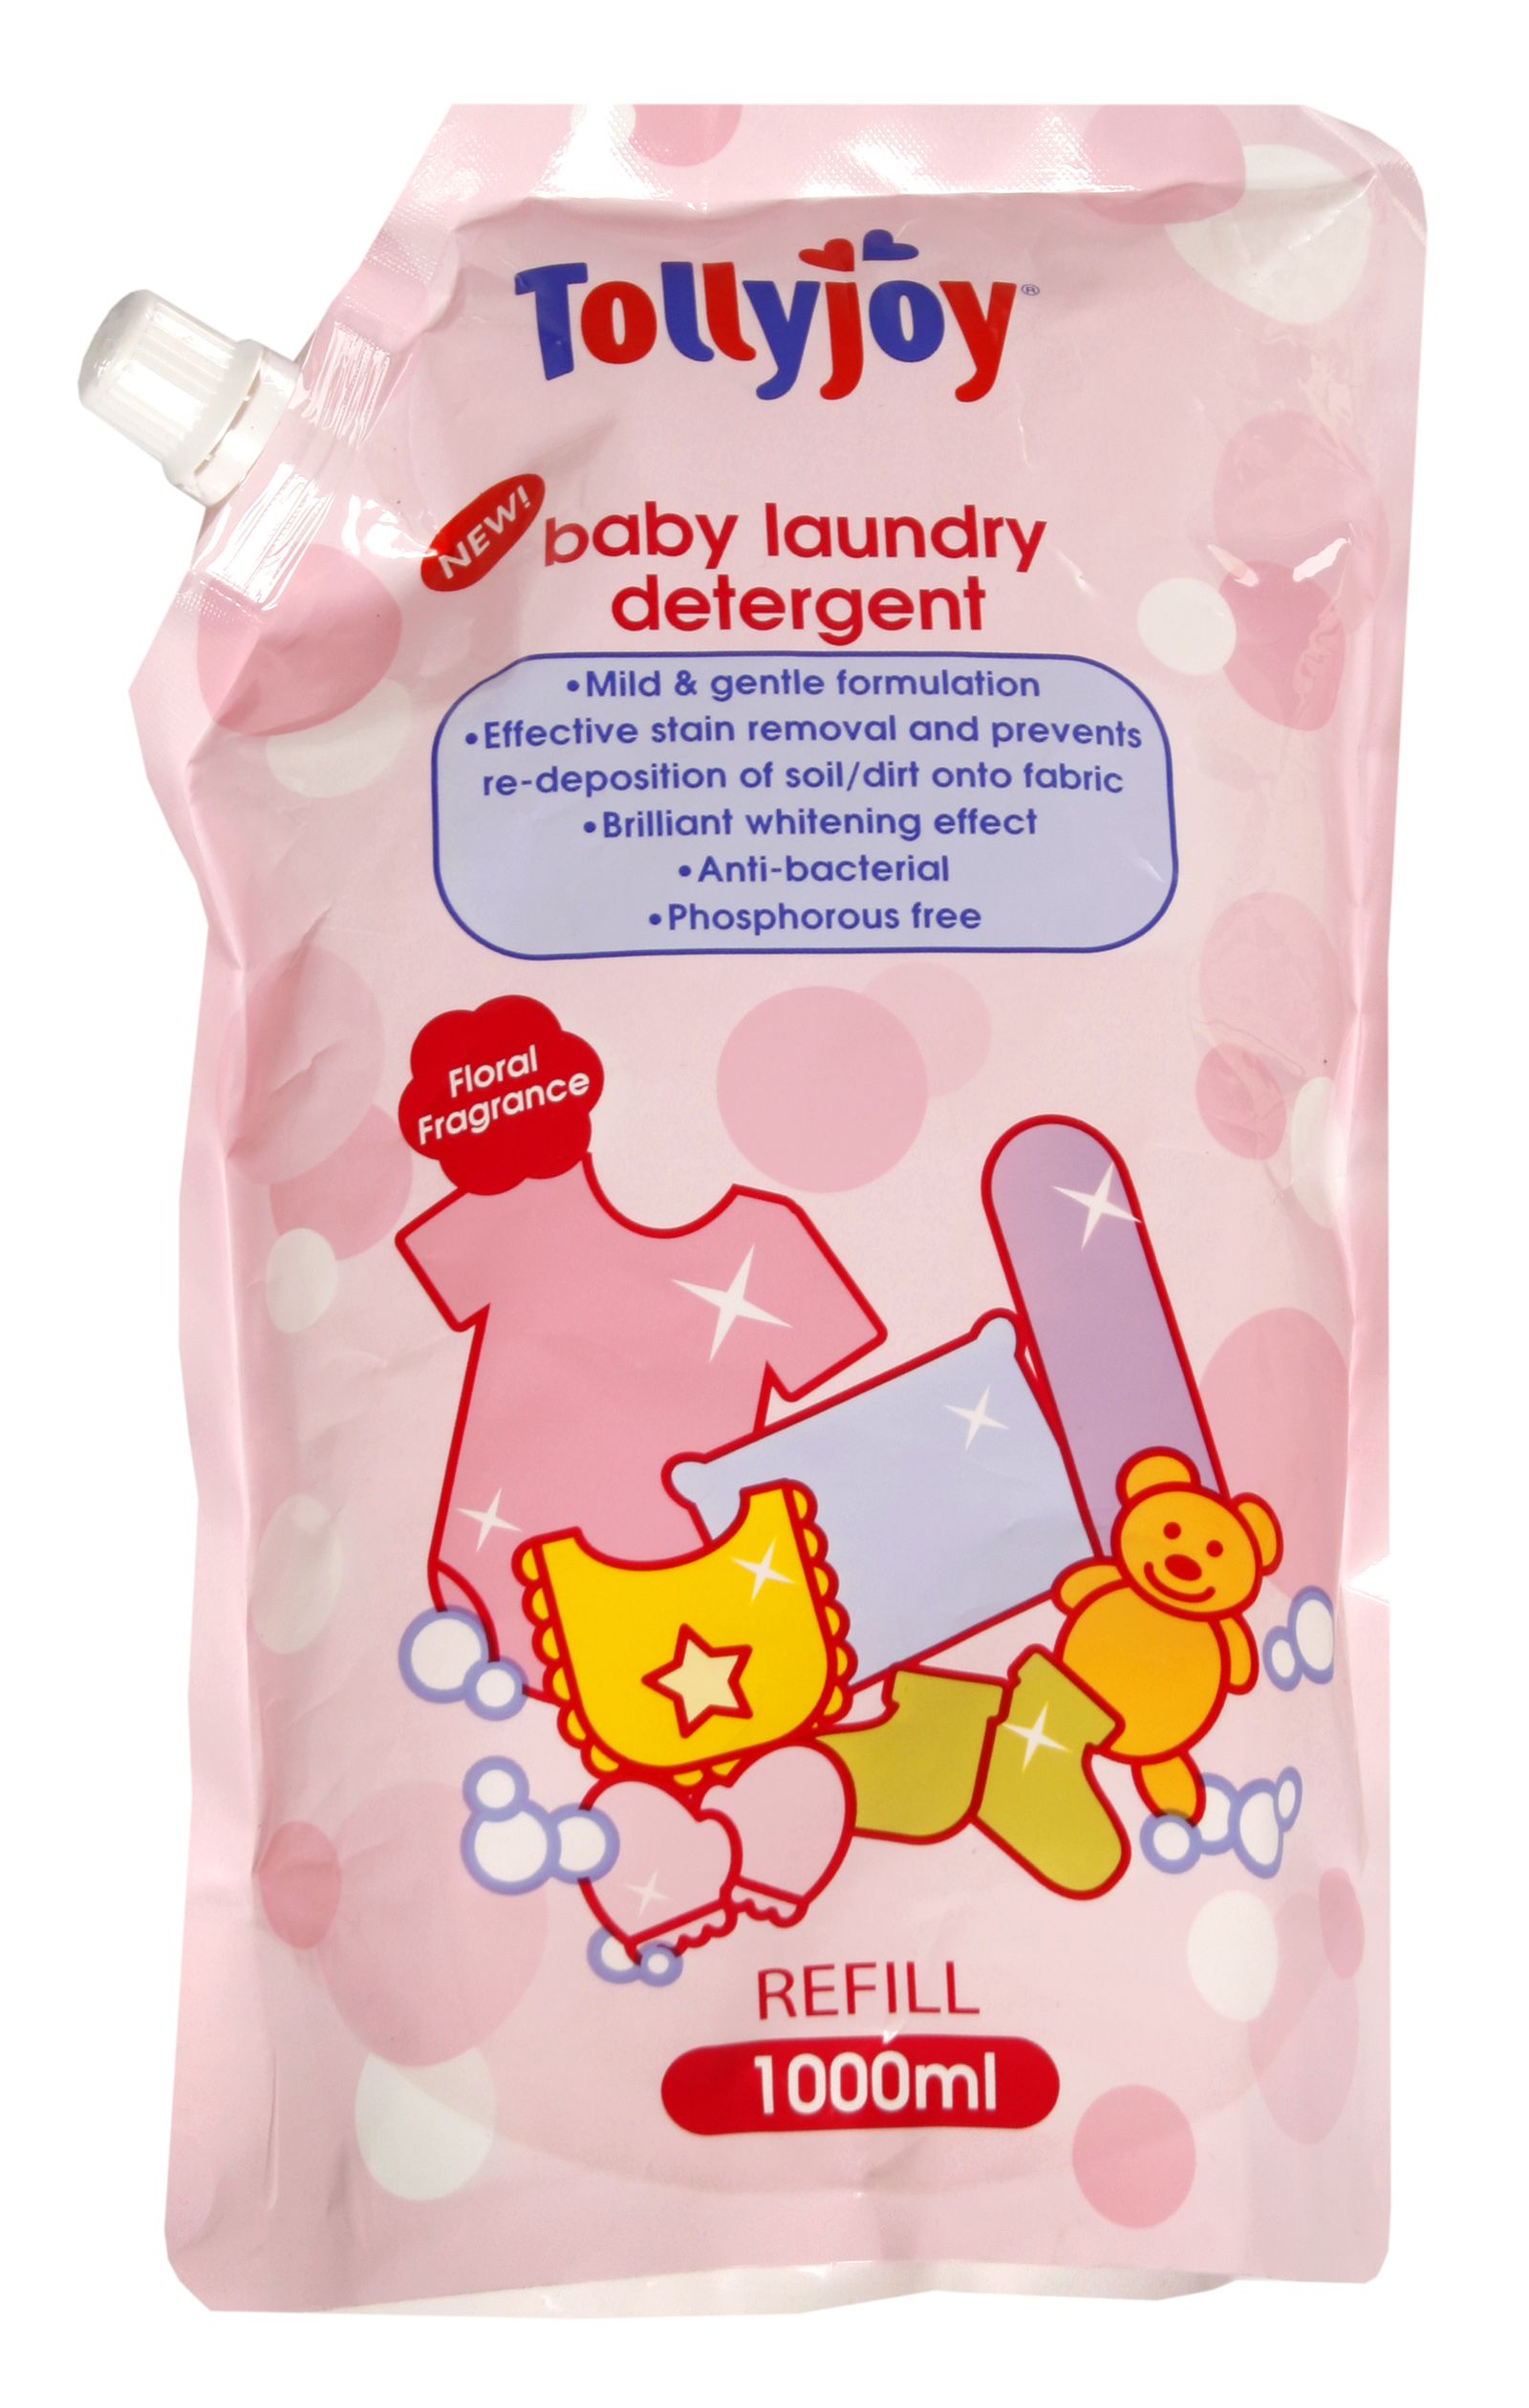 Tollyjoy Baby Laundry Detergent